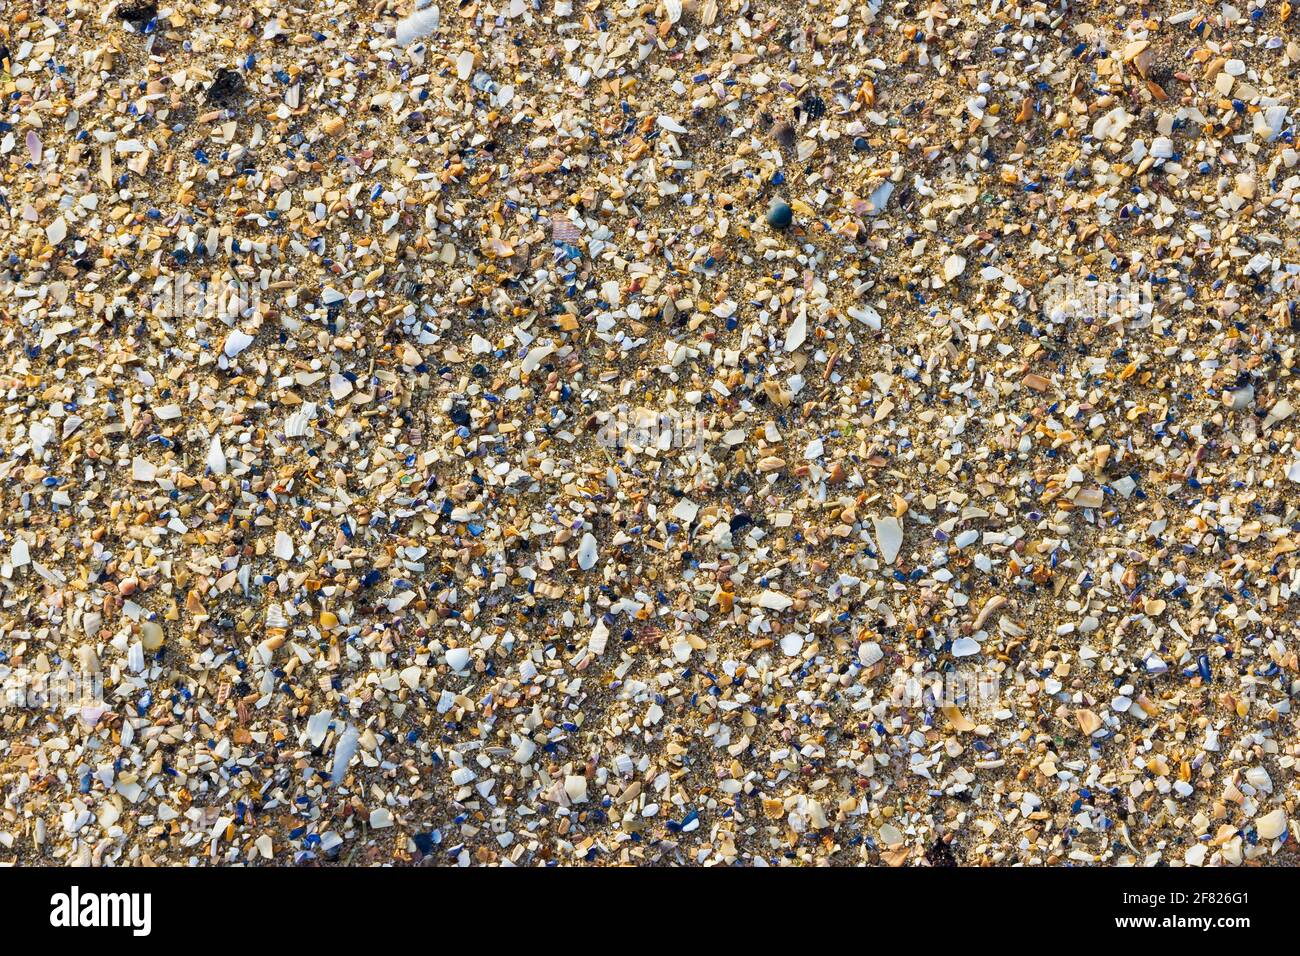 Detail of sand and shell fragments on a beach Stock Photo